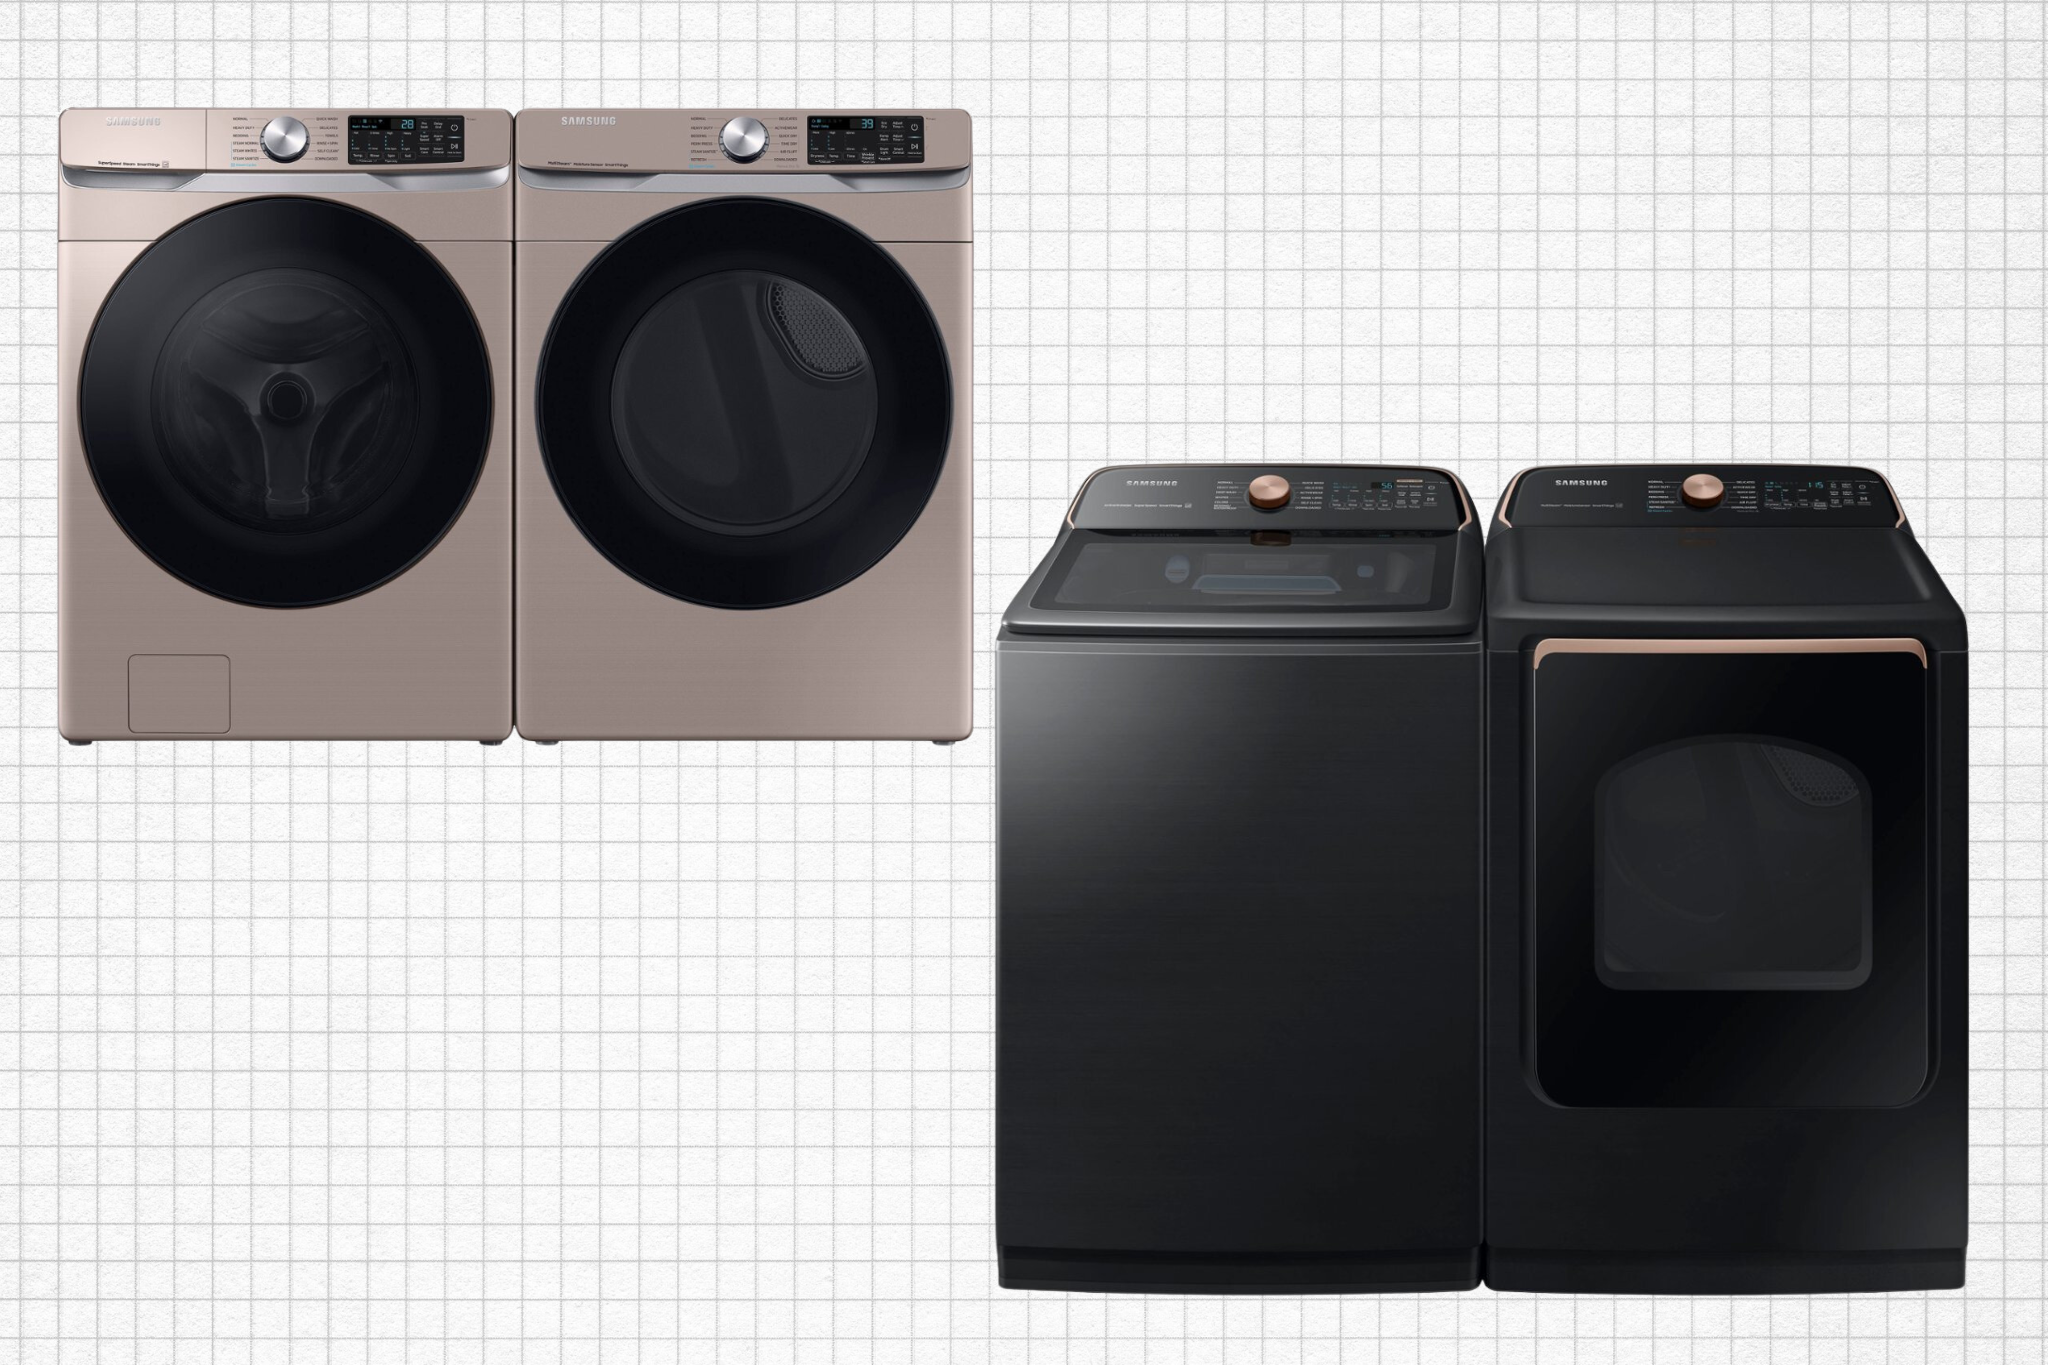 Samsung Smart Front Load Washer & Smart Electric Dryer and Samsung Top Load Smart Washer and Electric Dryer isolated on a grid paper background